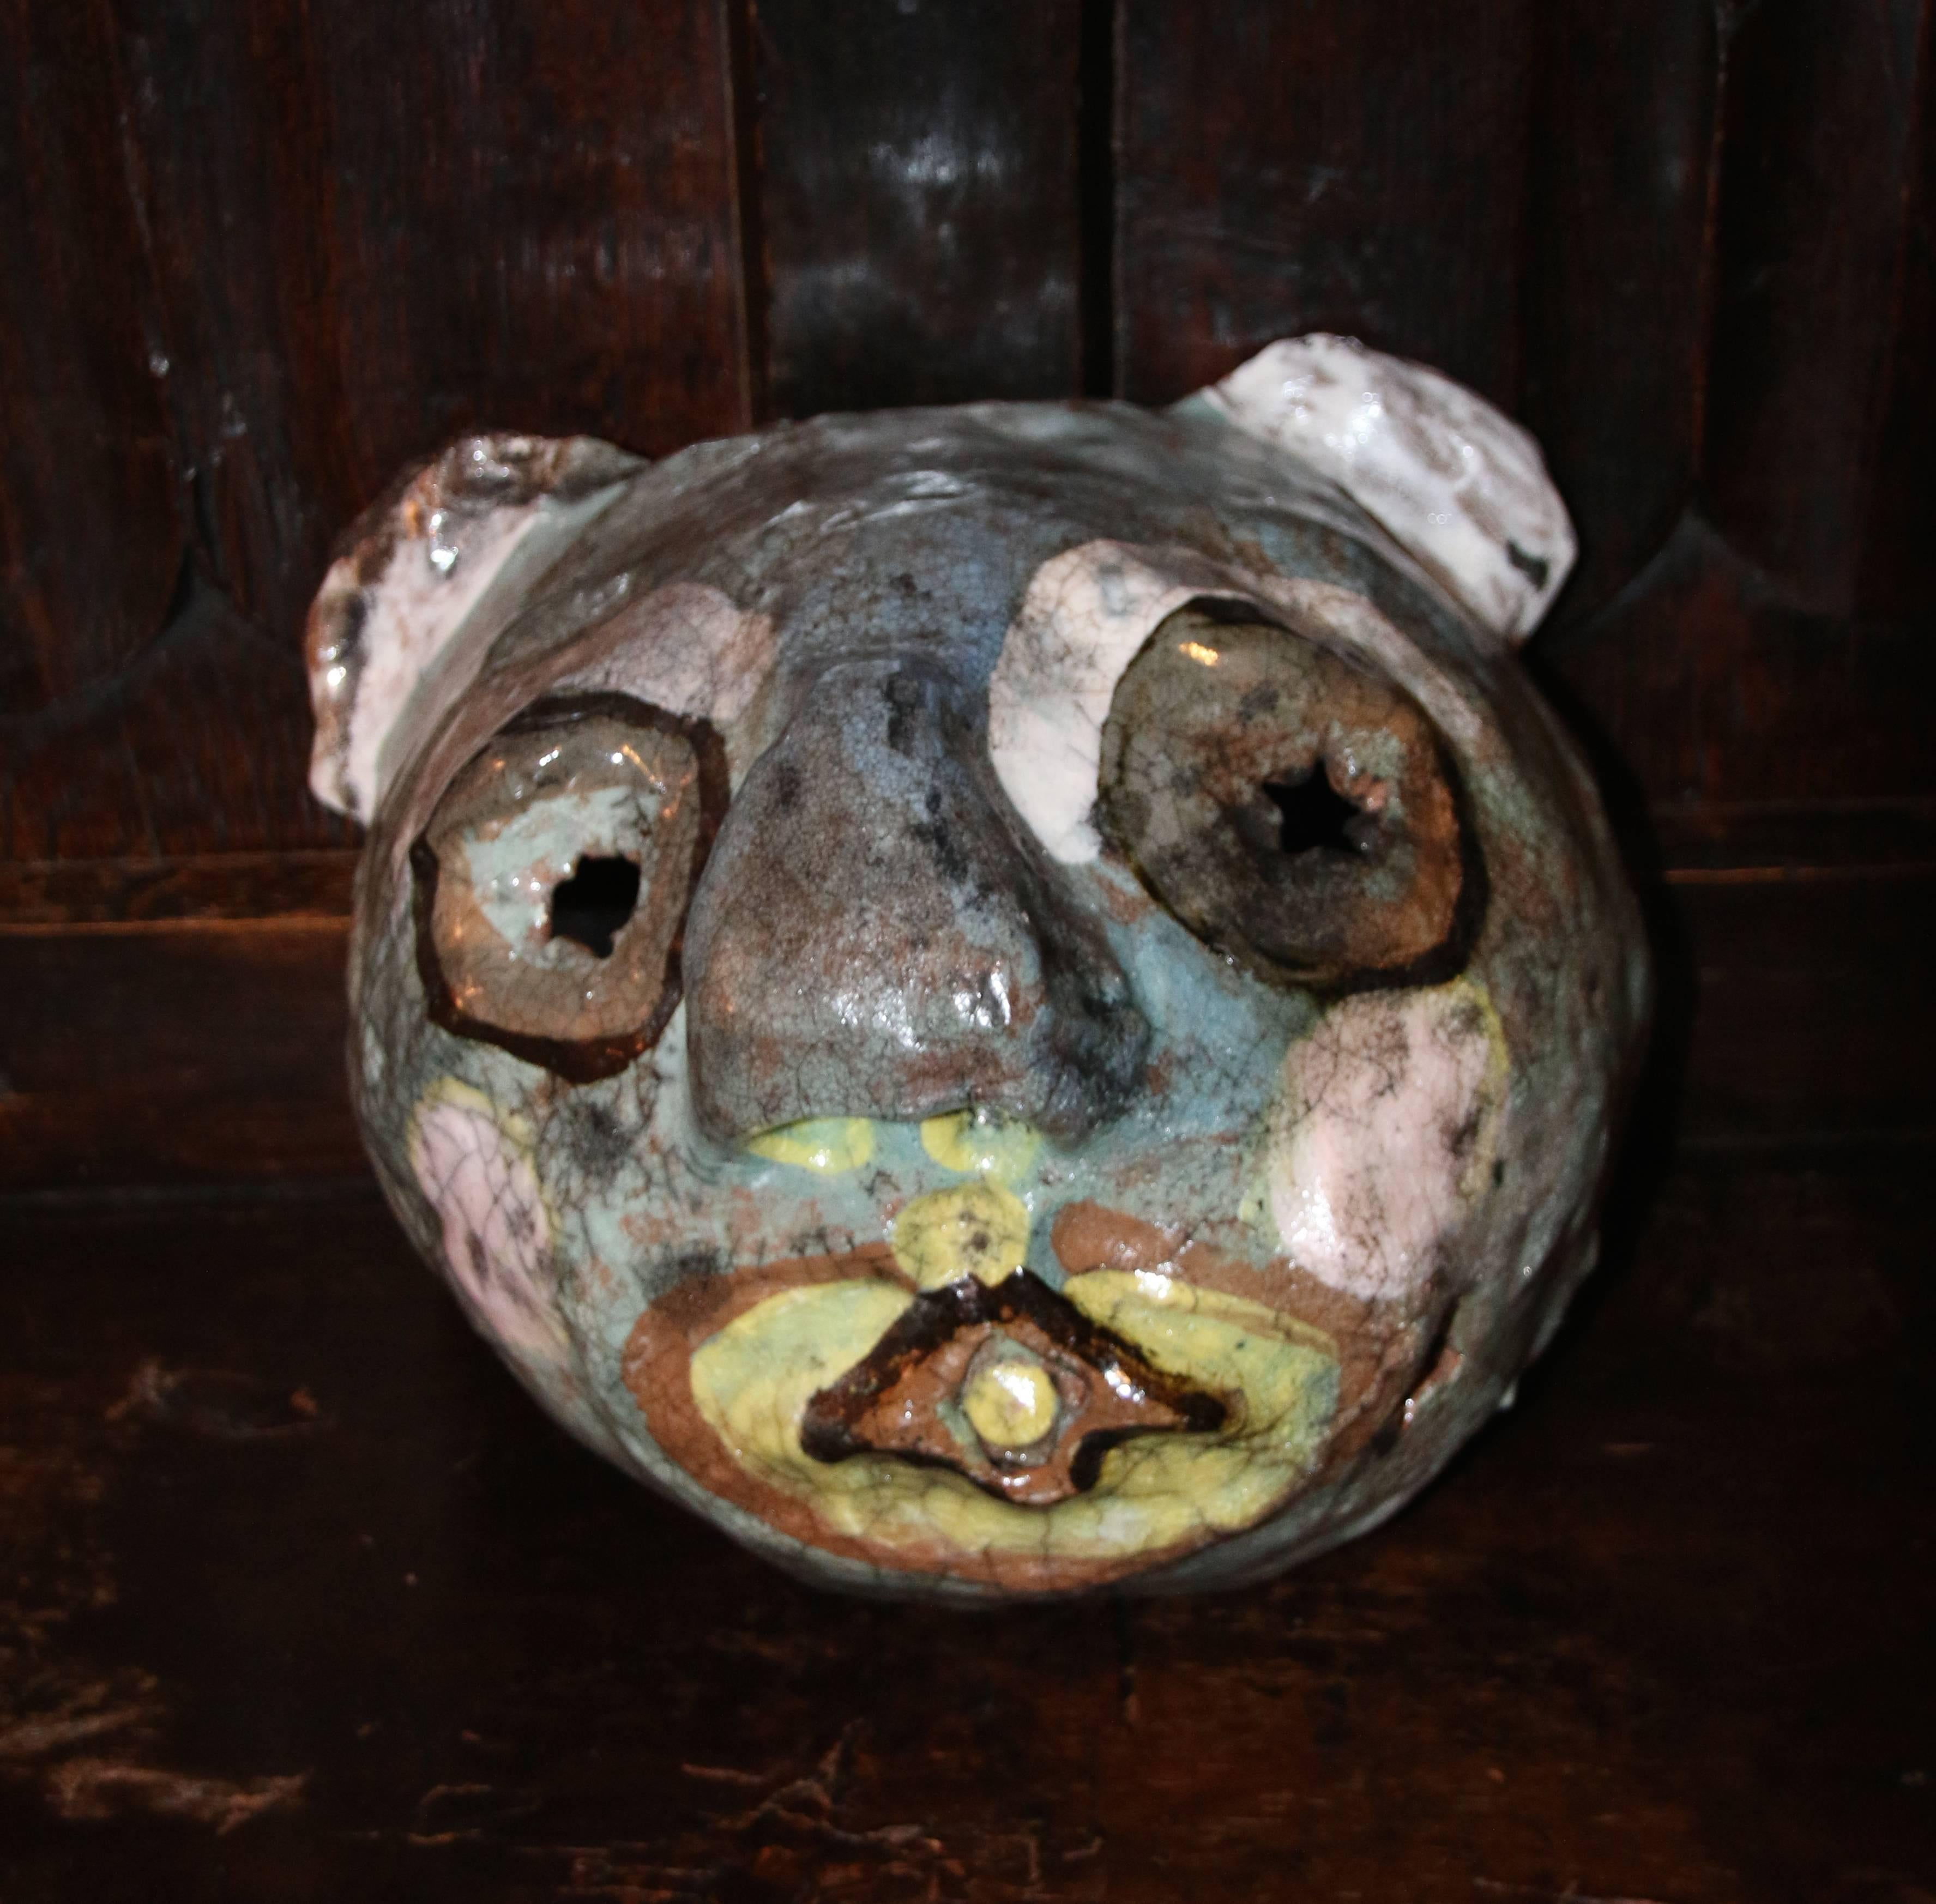 Francky Criquet. Born in 1968
Glazed stoneware masks
Human and animal faces
Each piece is unique
Various dimensions for each piece, between 25 and 35 cm